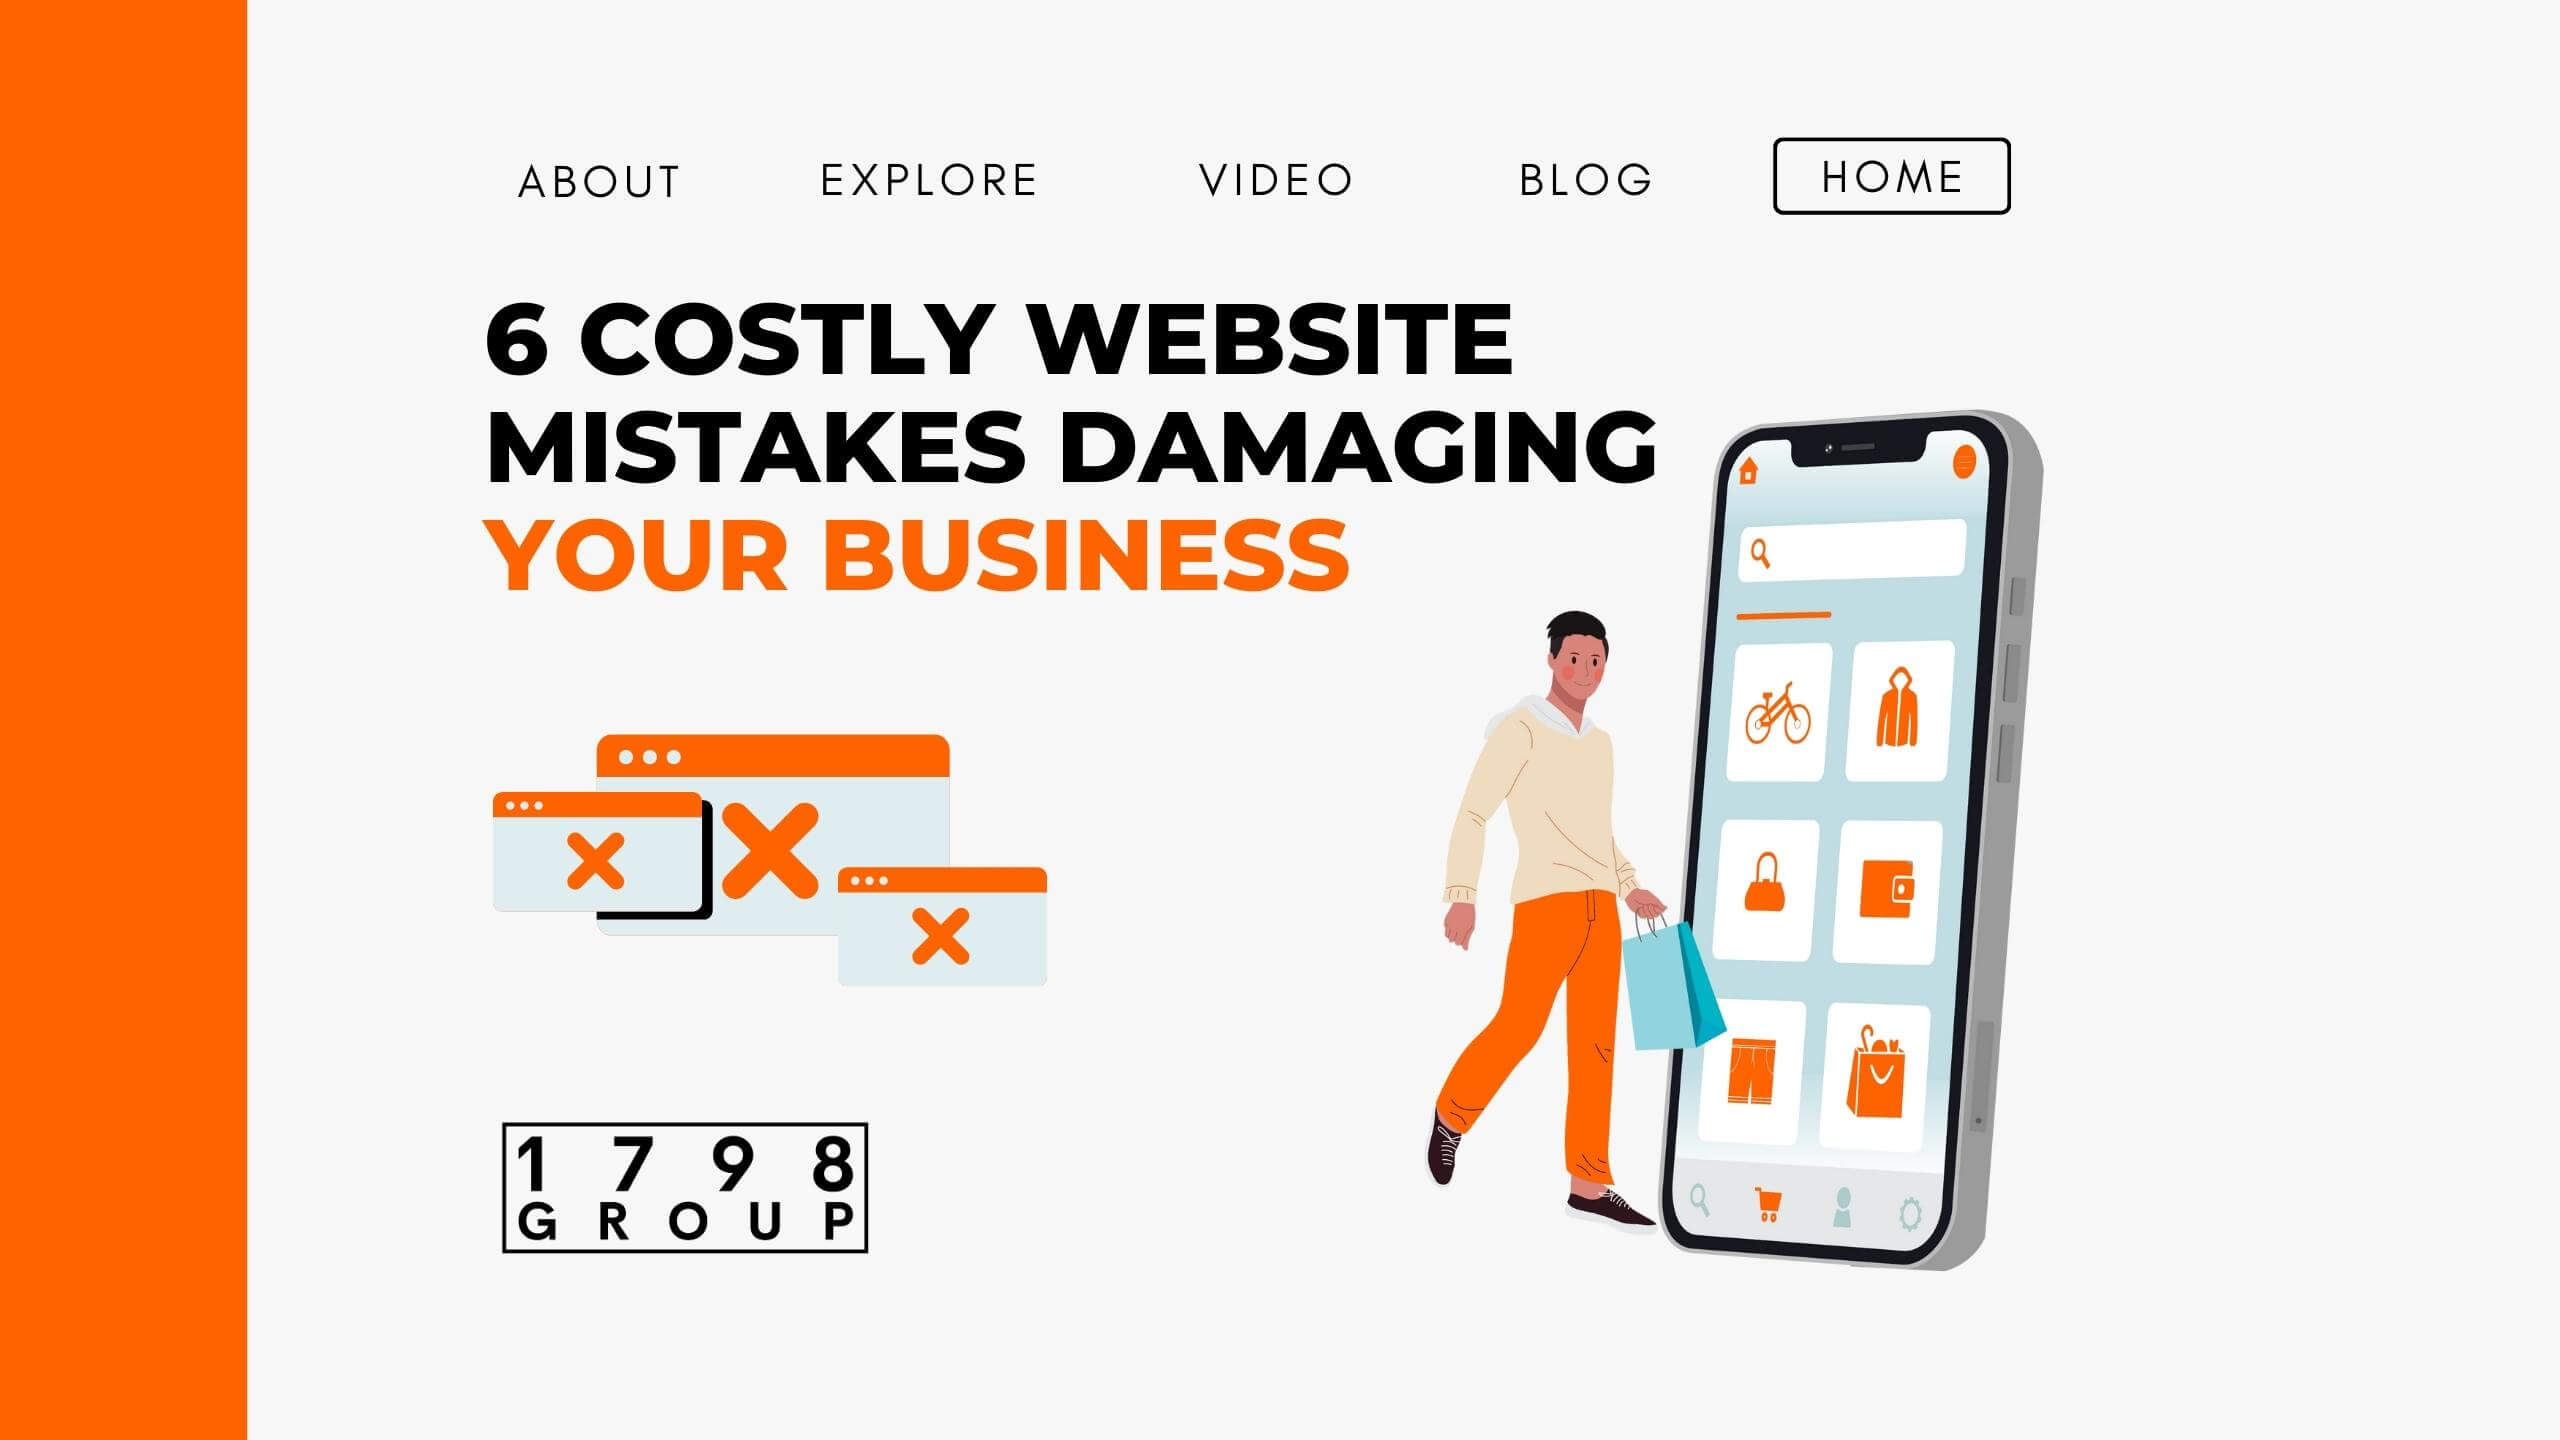 6 Costly Website Mistakes Damaging Your Business